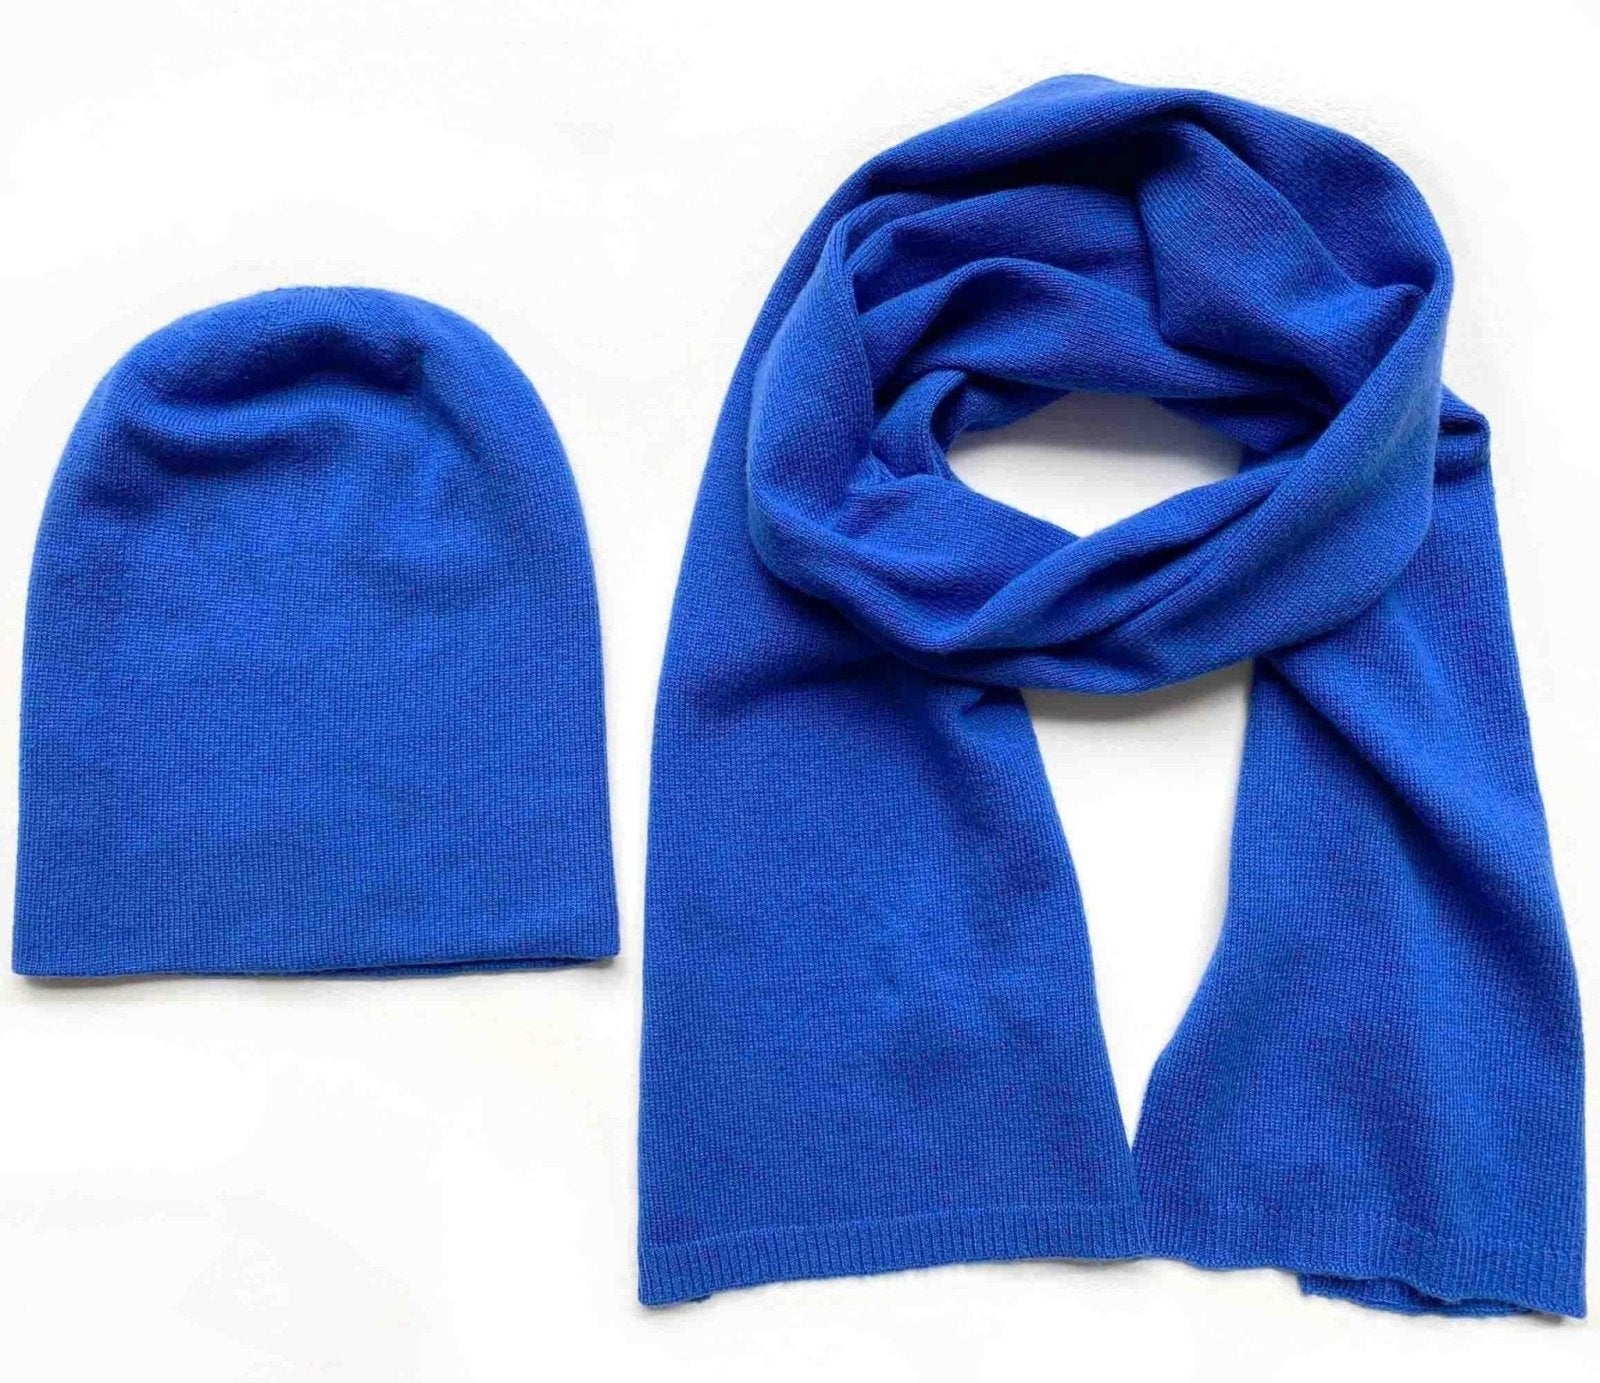 Bundle offer for women's cashmere hat, scarf and gloves in Royal blue - SEMON Cashmere